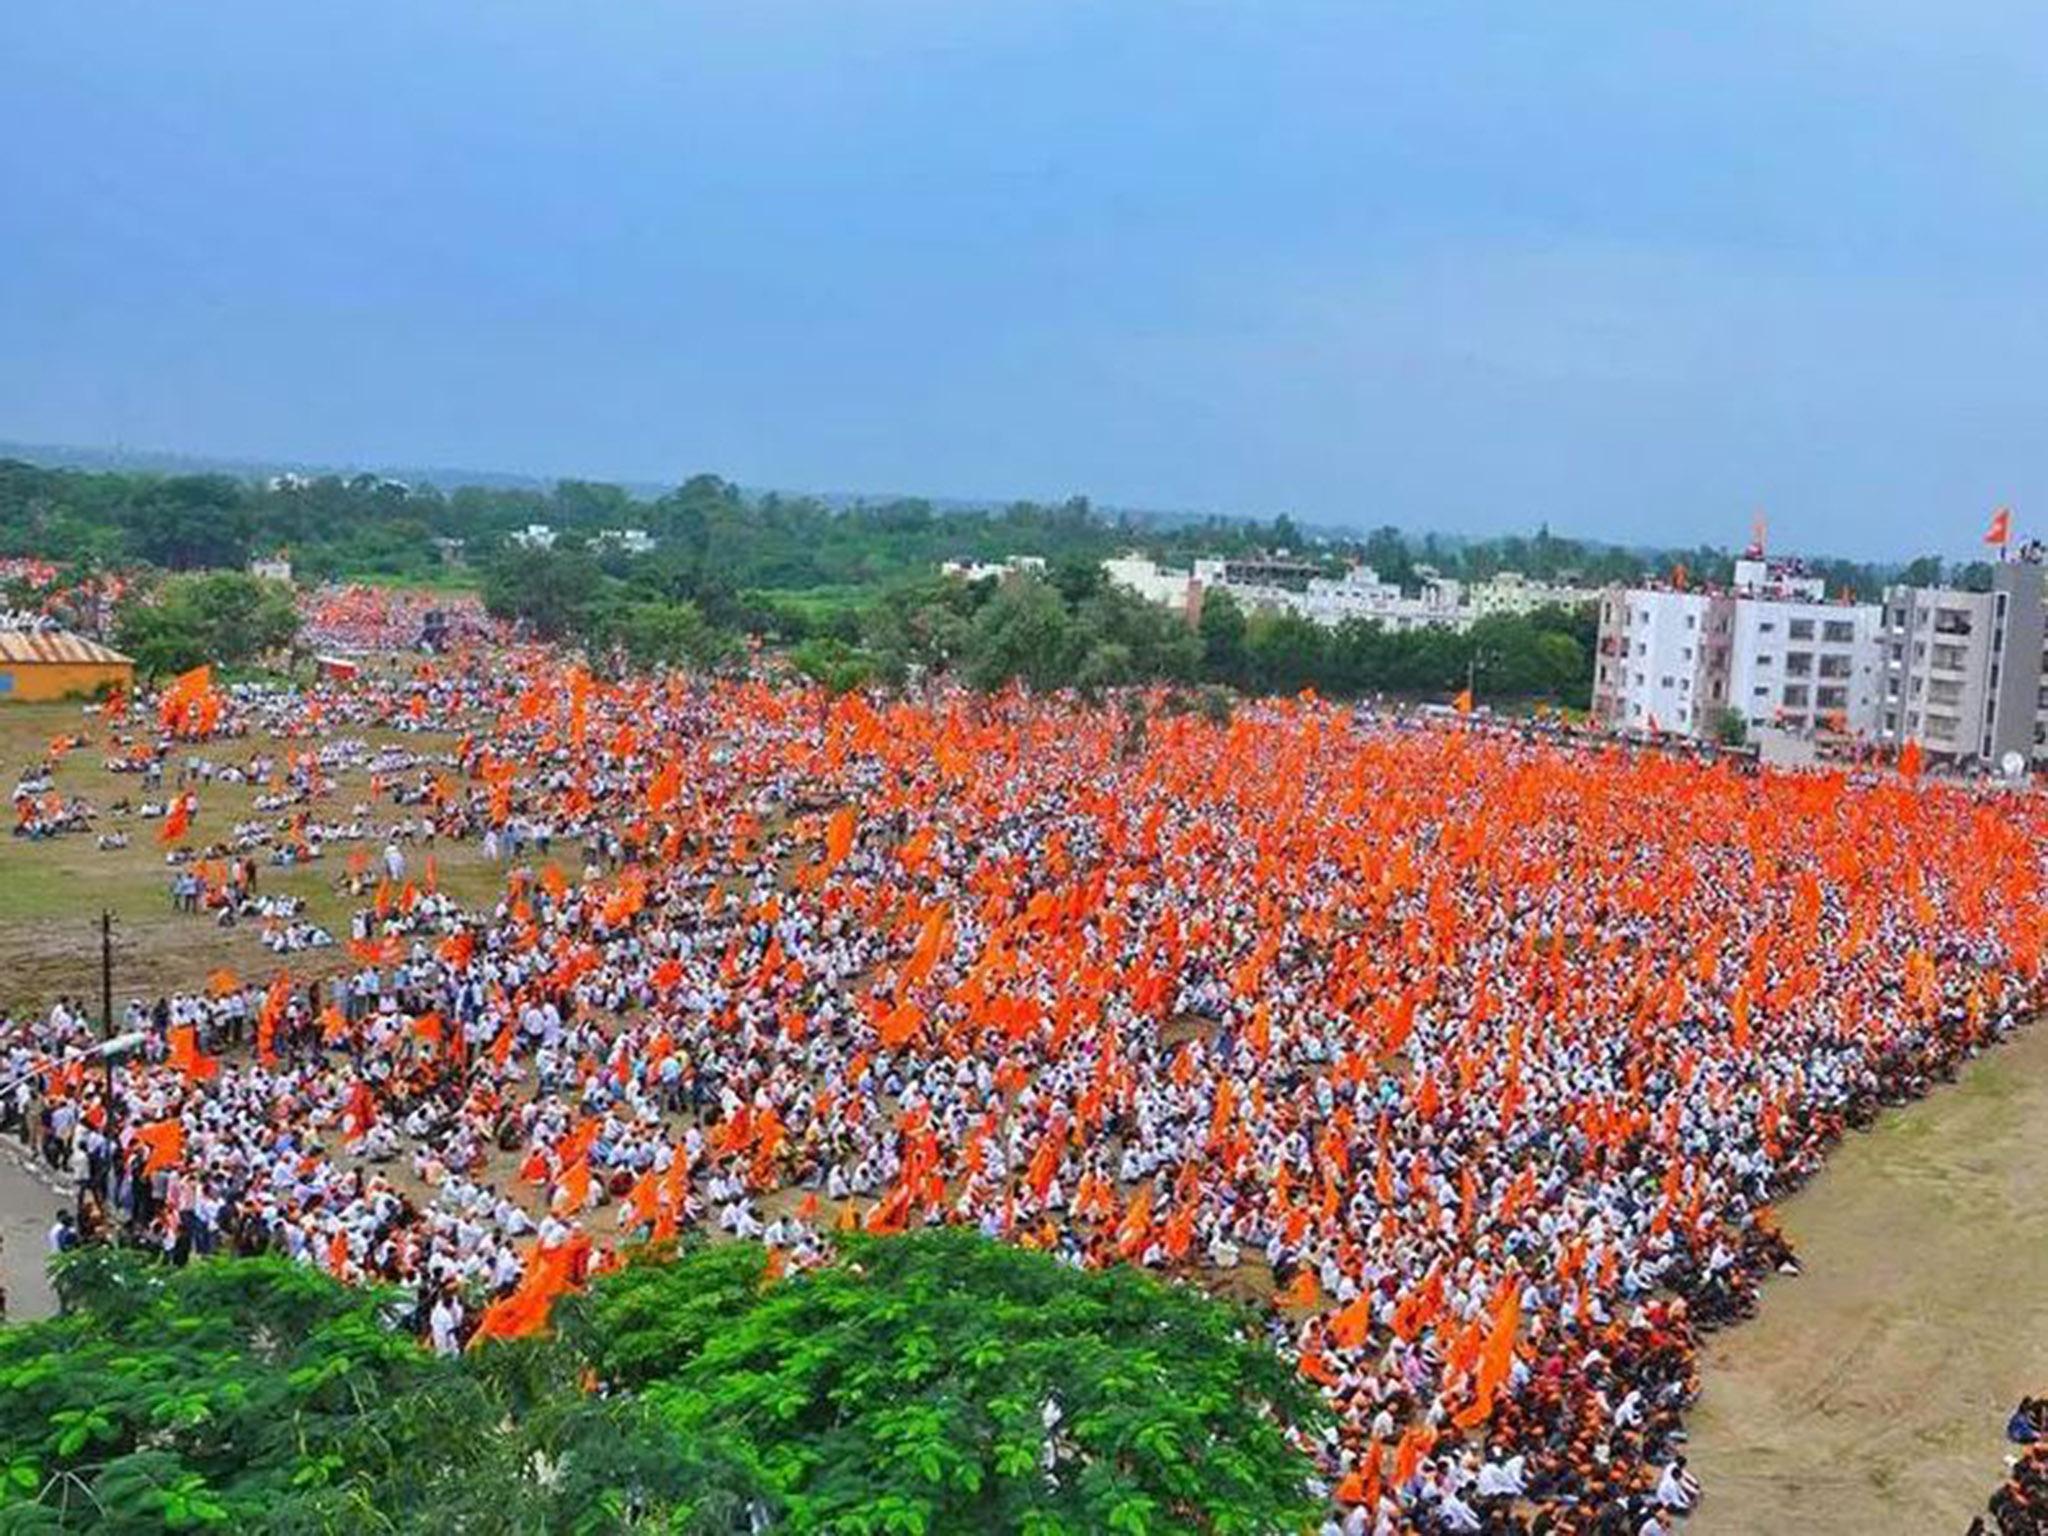 Vast marches have recently taken place in the cities of Pune and Ahmednagar, triggered by the brutal murder of a teenager